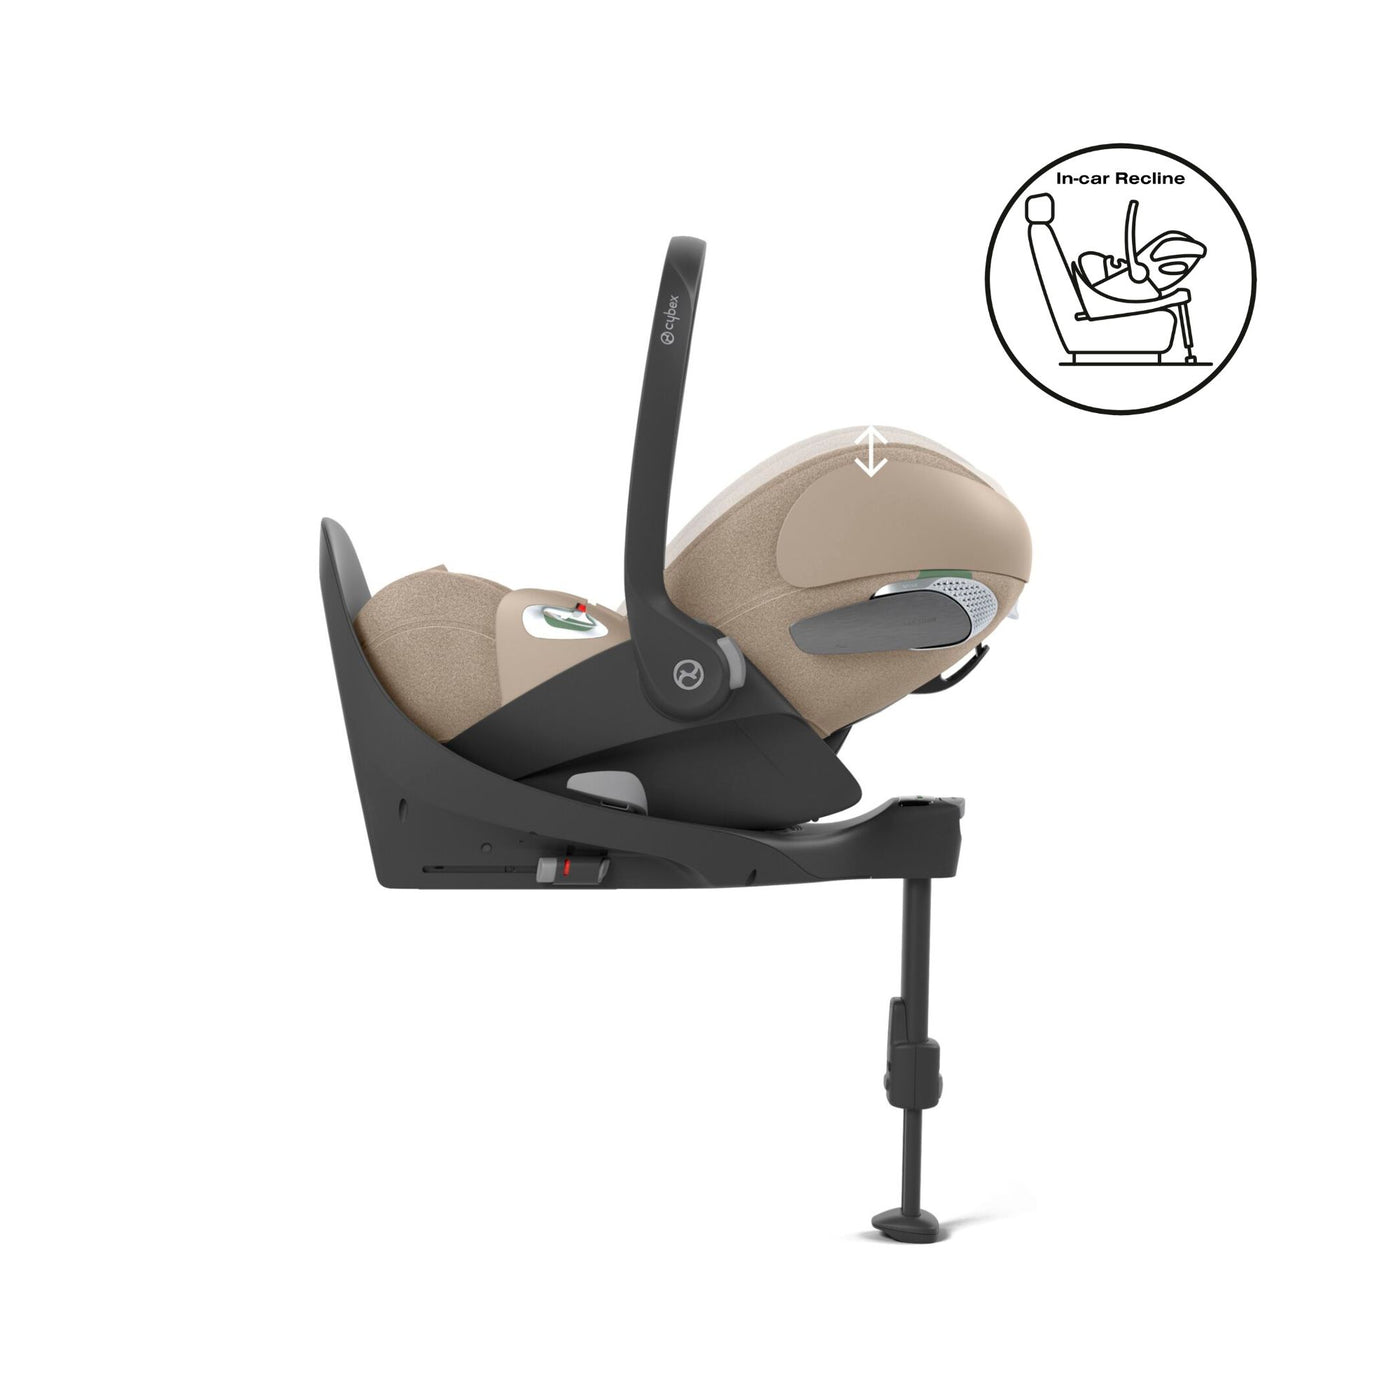 Cybex Cloud T i-size car seat cosy beige can lie flat inside car with base T